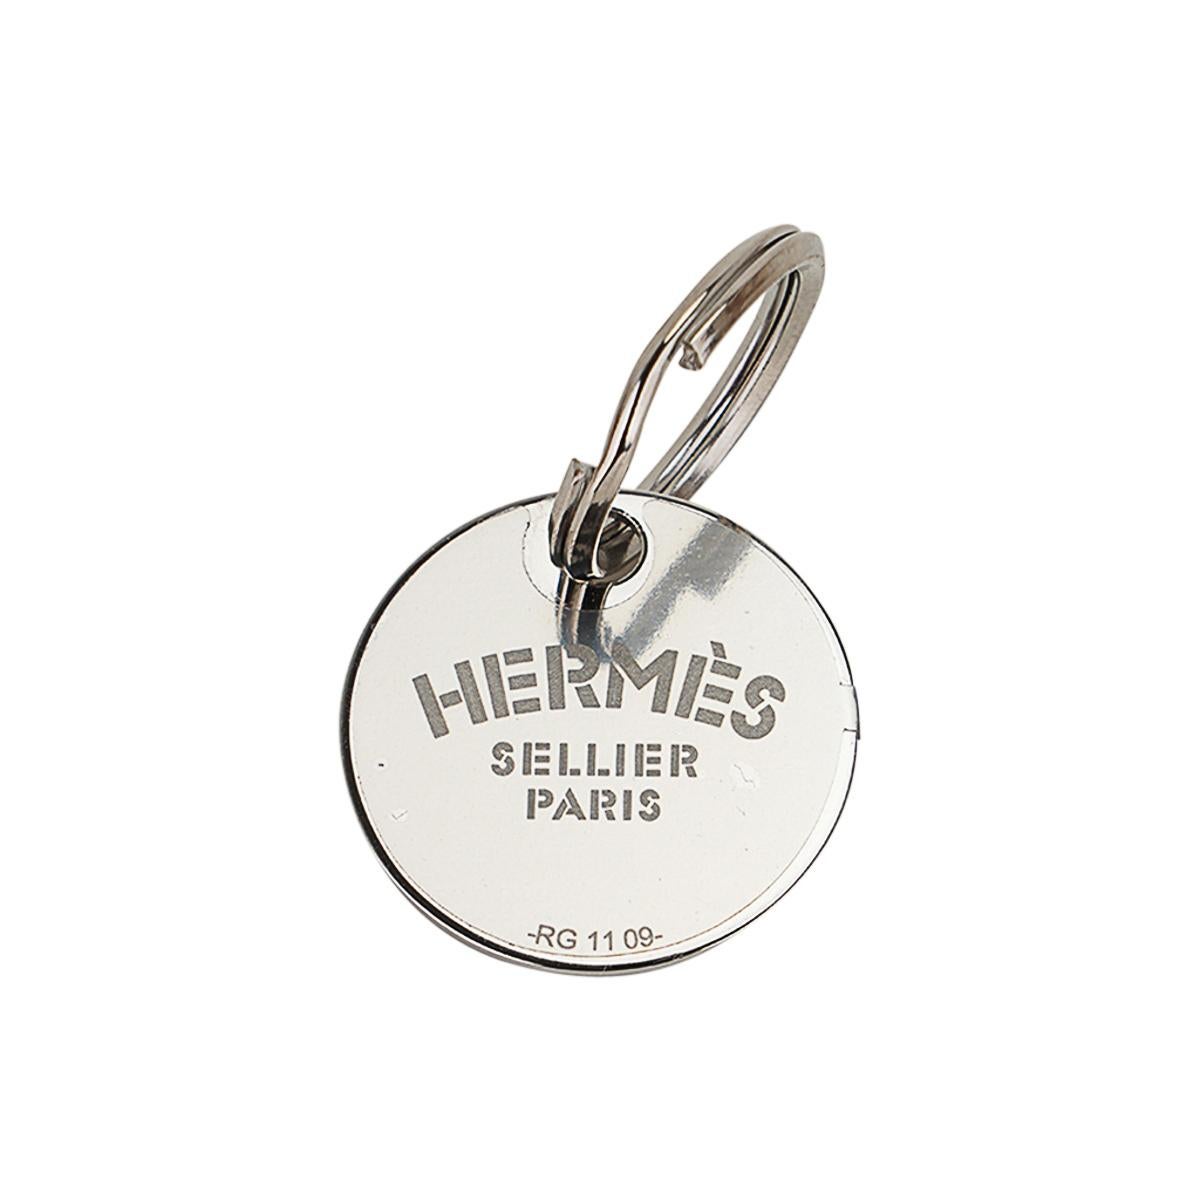 Mightychic offers an Hermes Etriviere dog collar featured in 
Dark Irish natural bridle leather.
Buckle is stirrup shaped and stamped HERMES.
D ring for a leash.
Includes a stainless steel medal stamped Hermes Sellier Paris - reverse can be engraved